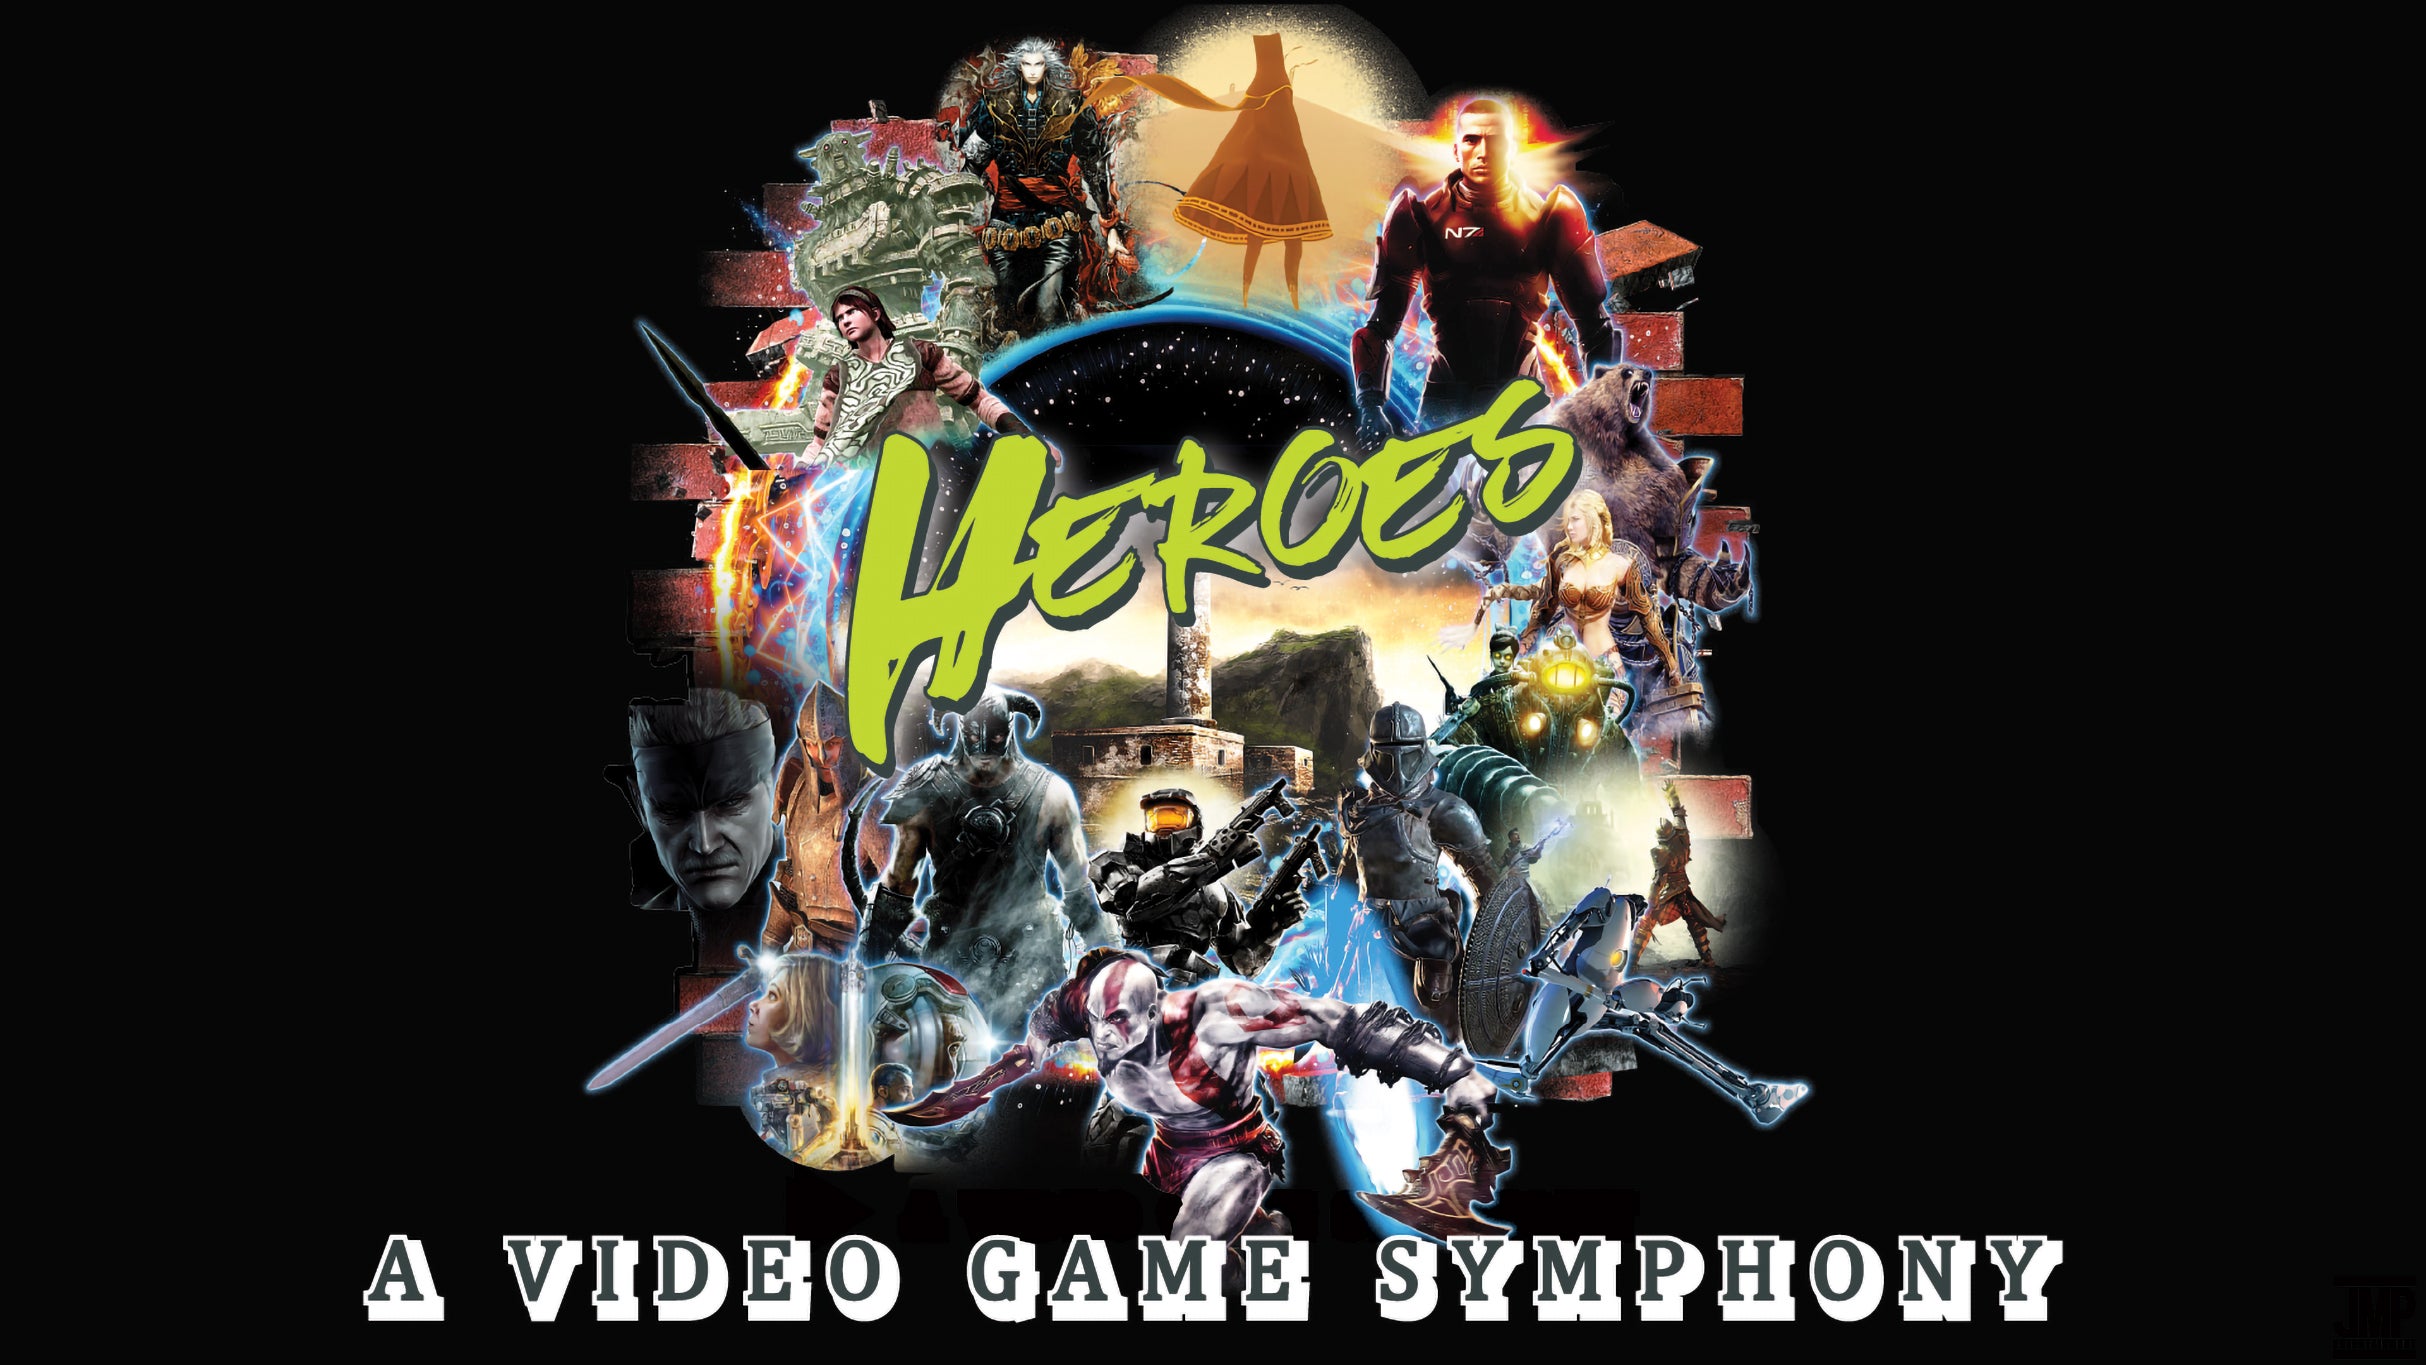 Heroes:  A Video Game Symphony at Auditorium Theatre